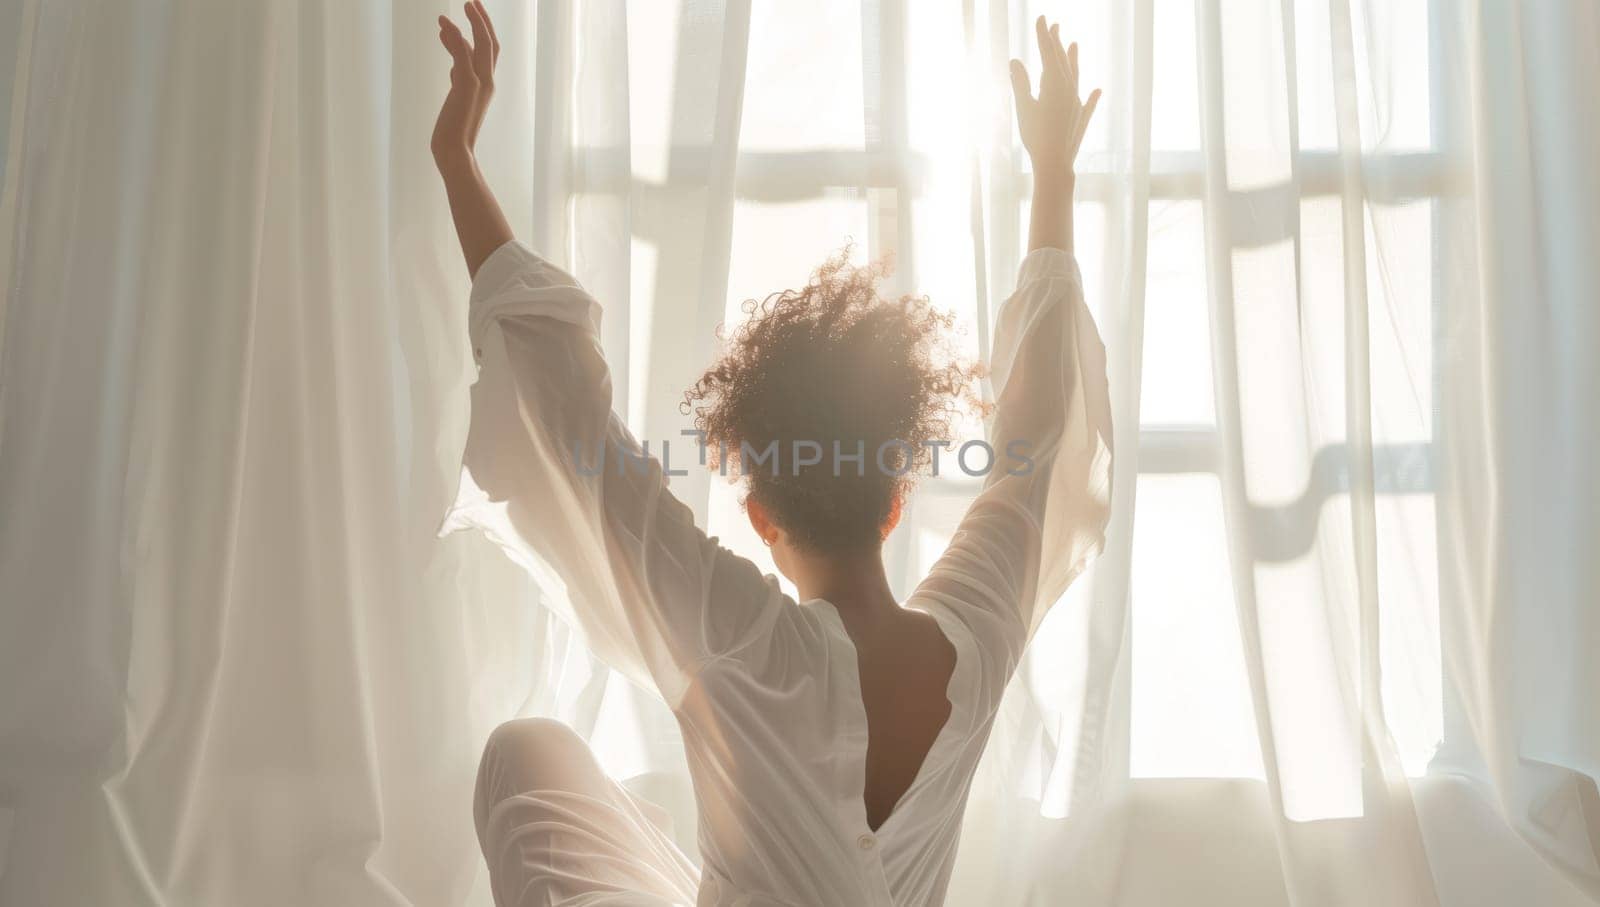 A woman in a flowing dress is seated in front of a window, with her arms outstretched in a happy gesture, showcasing the elegance of performing arts